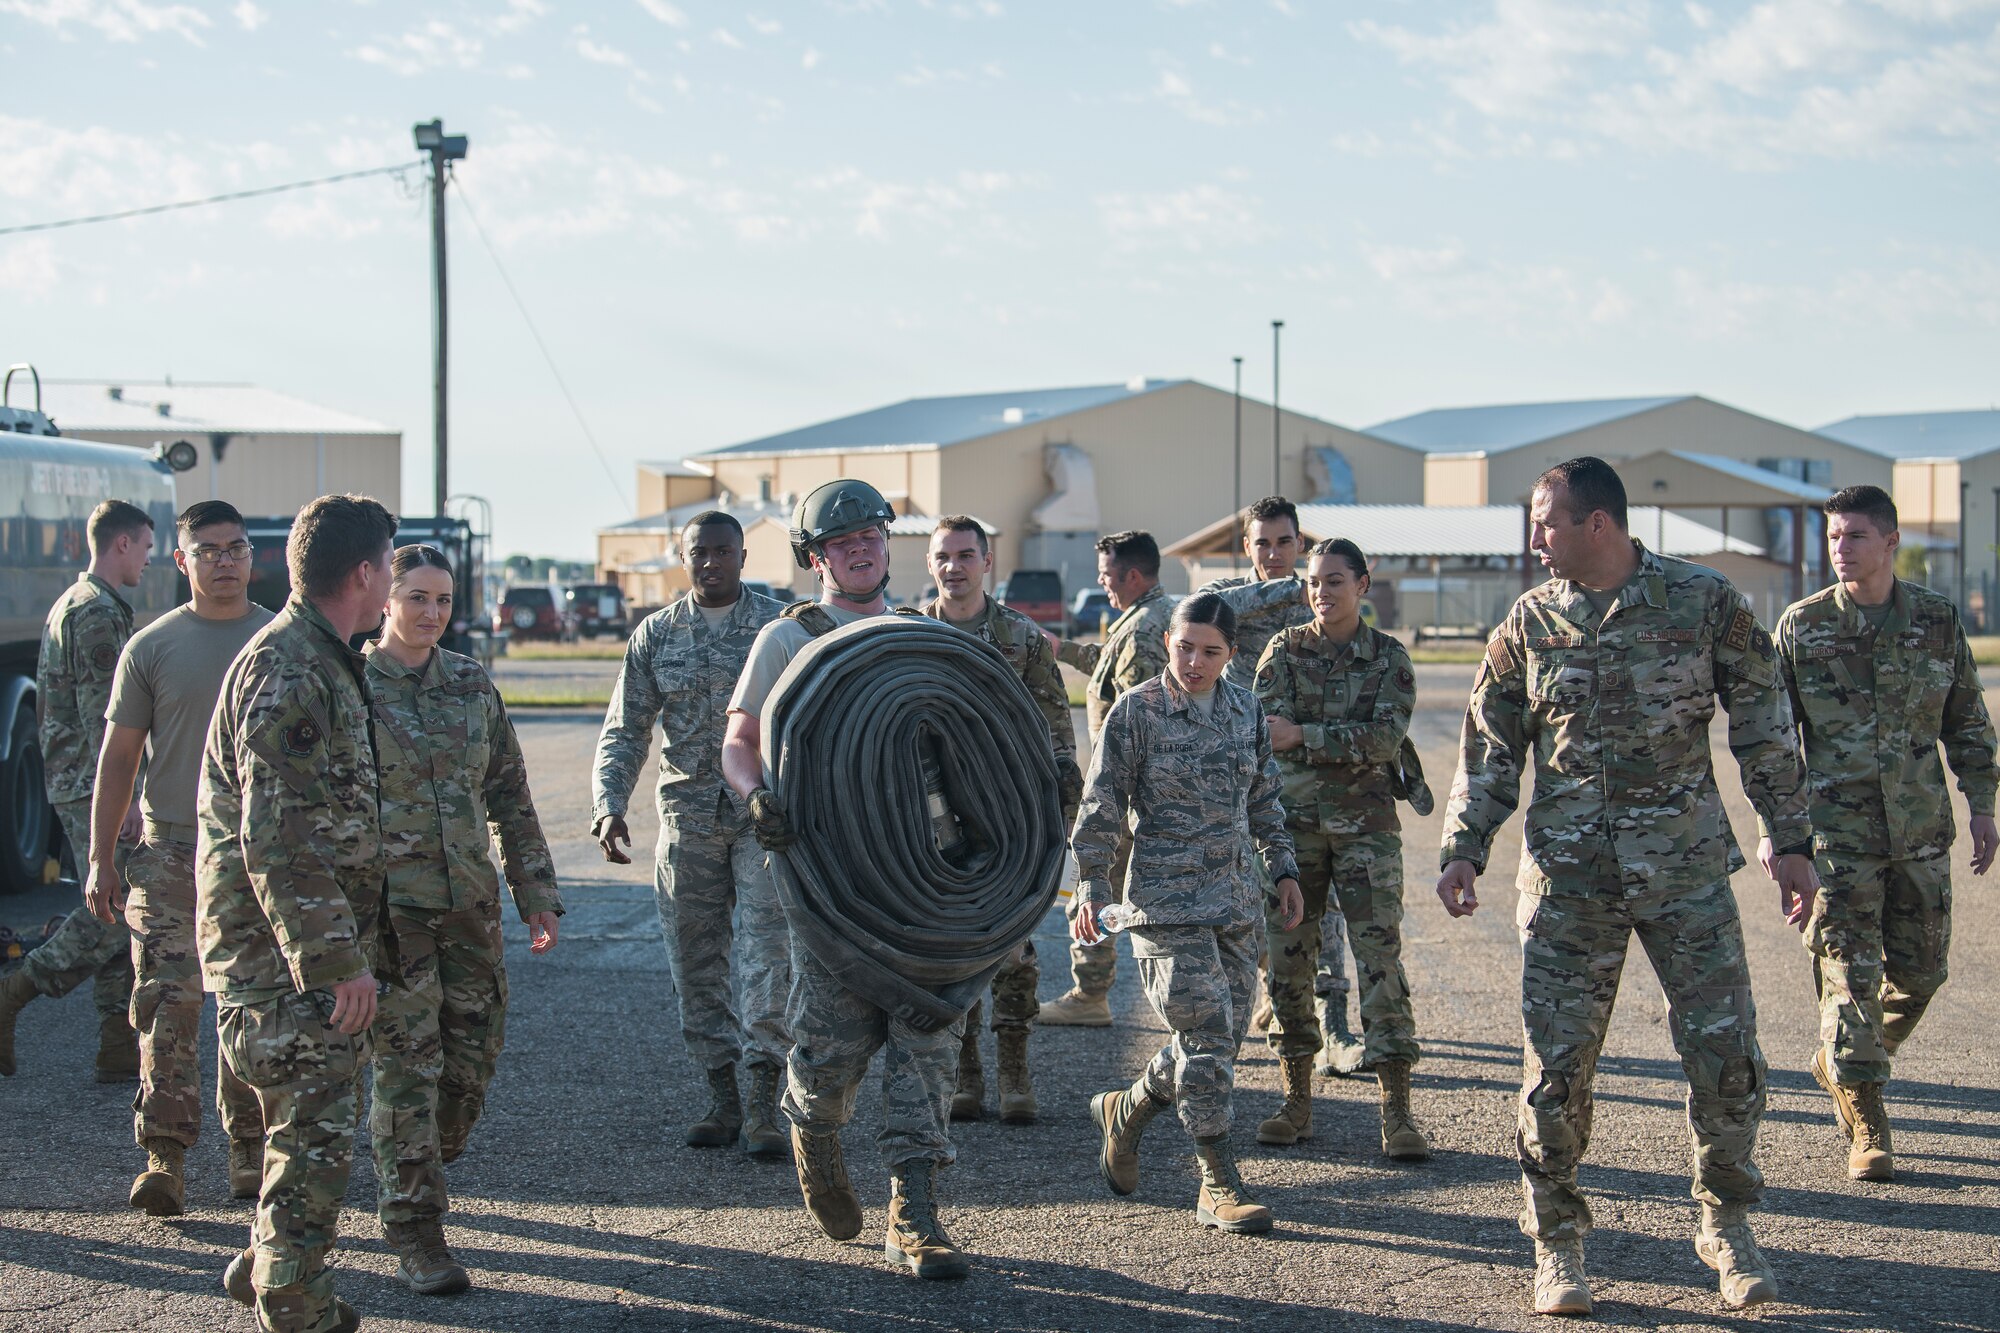 Airman 1st Class Kyle Fabrizius, 27th Special Operations Logistics Readiness Squadron fuels distribution technician, carries a fuel hose while members of the 27 SOLRS watch and cheer him on during the Forward Air Refueling Point tryouts at Cannon Air Force Base, N.M., October 9, 2019. The hose carry is the final part of the tryout, where members have to carry a 100 pound hose as fast as they can. (U.S. Air Force photo by Senior Airman Vernon R. Walter III)